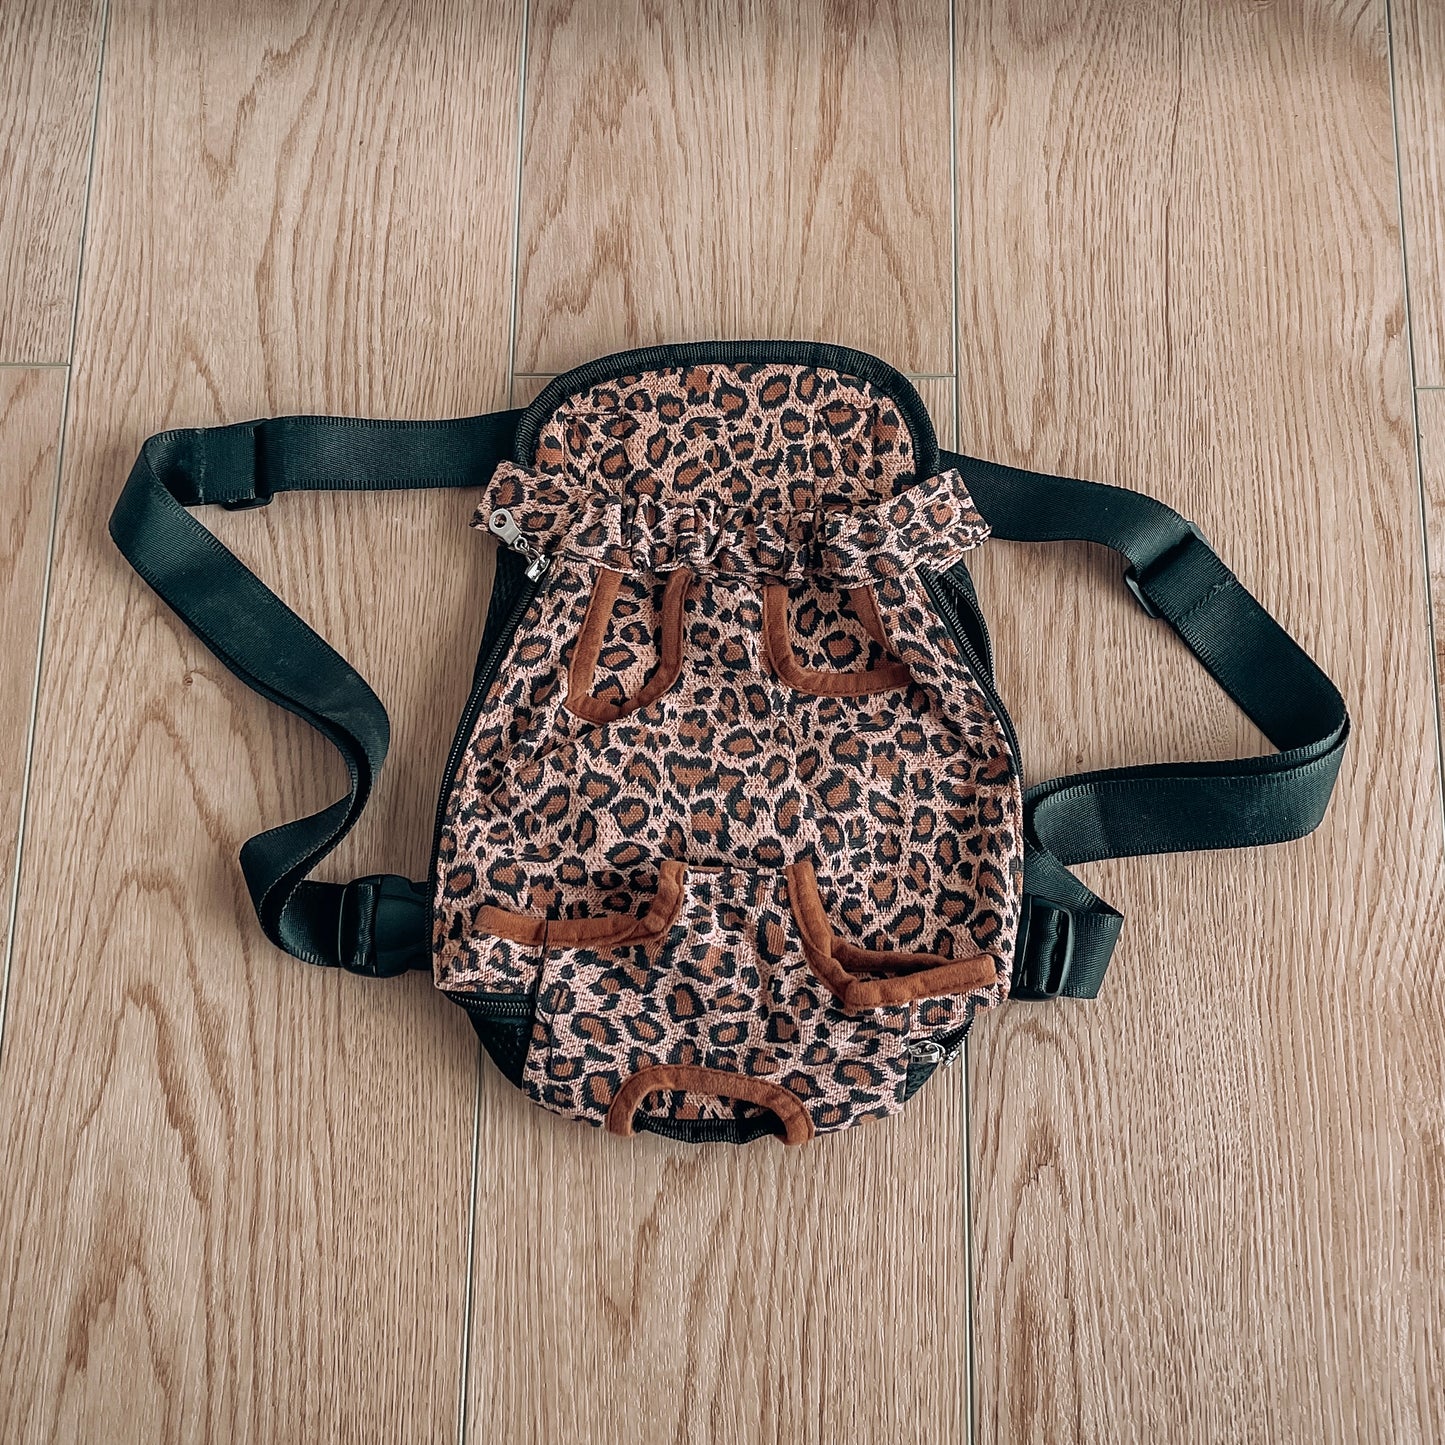 Leopard Puppy Dog Backpack